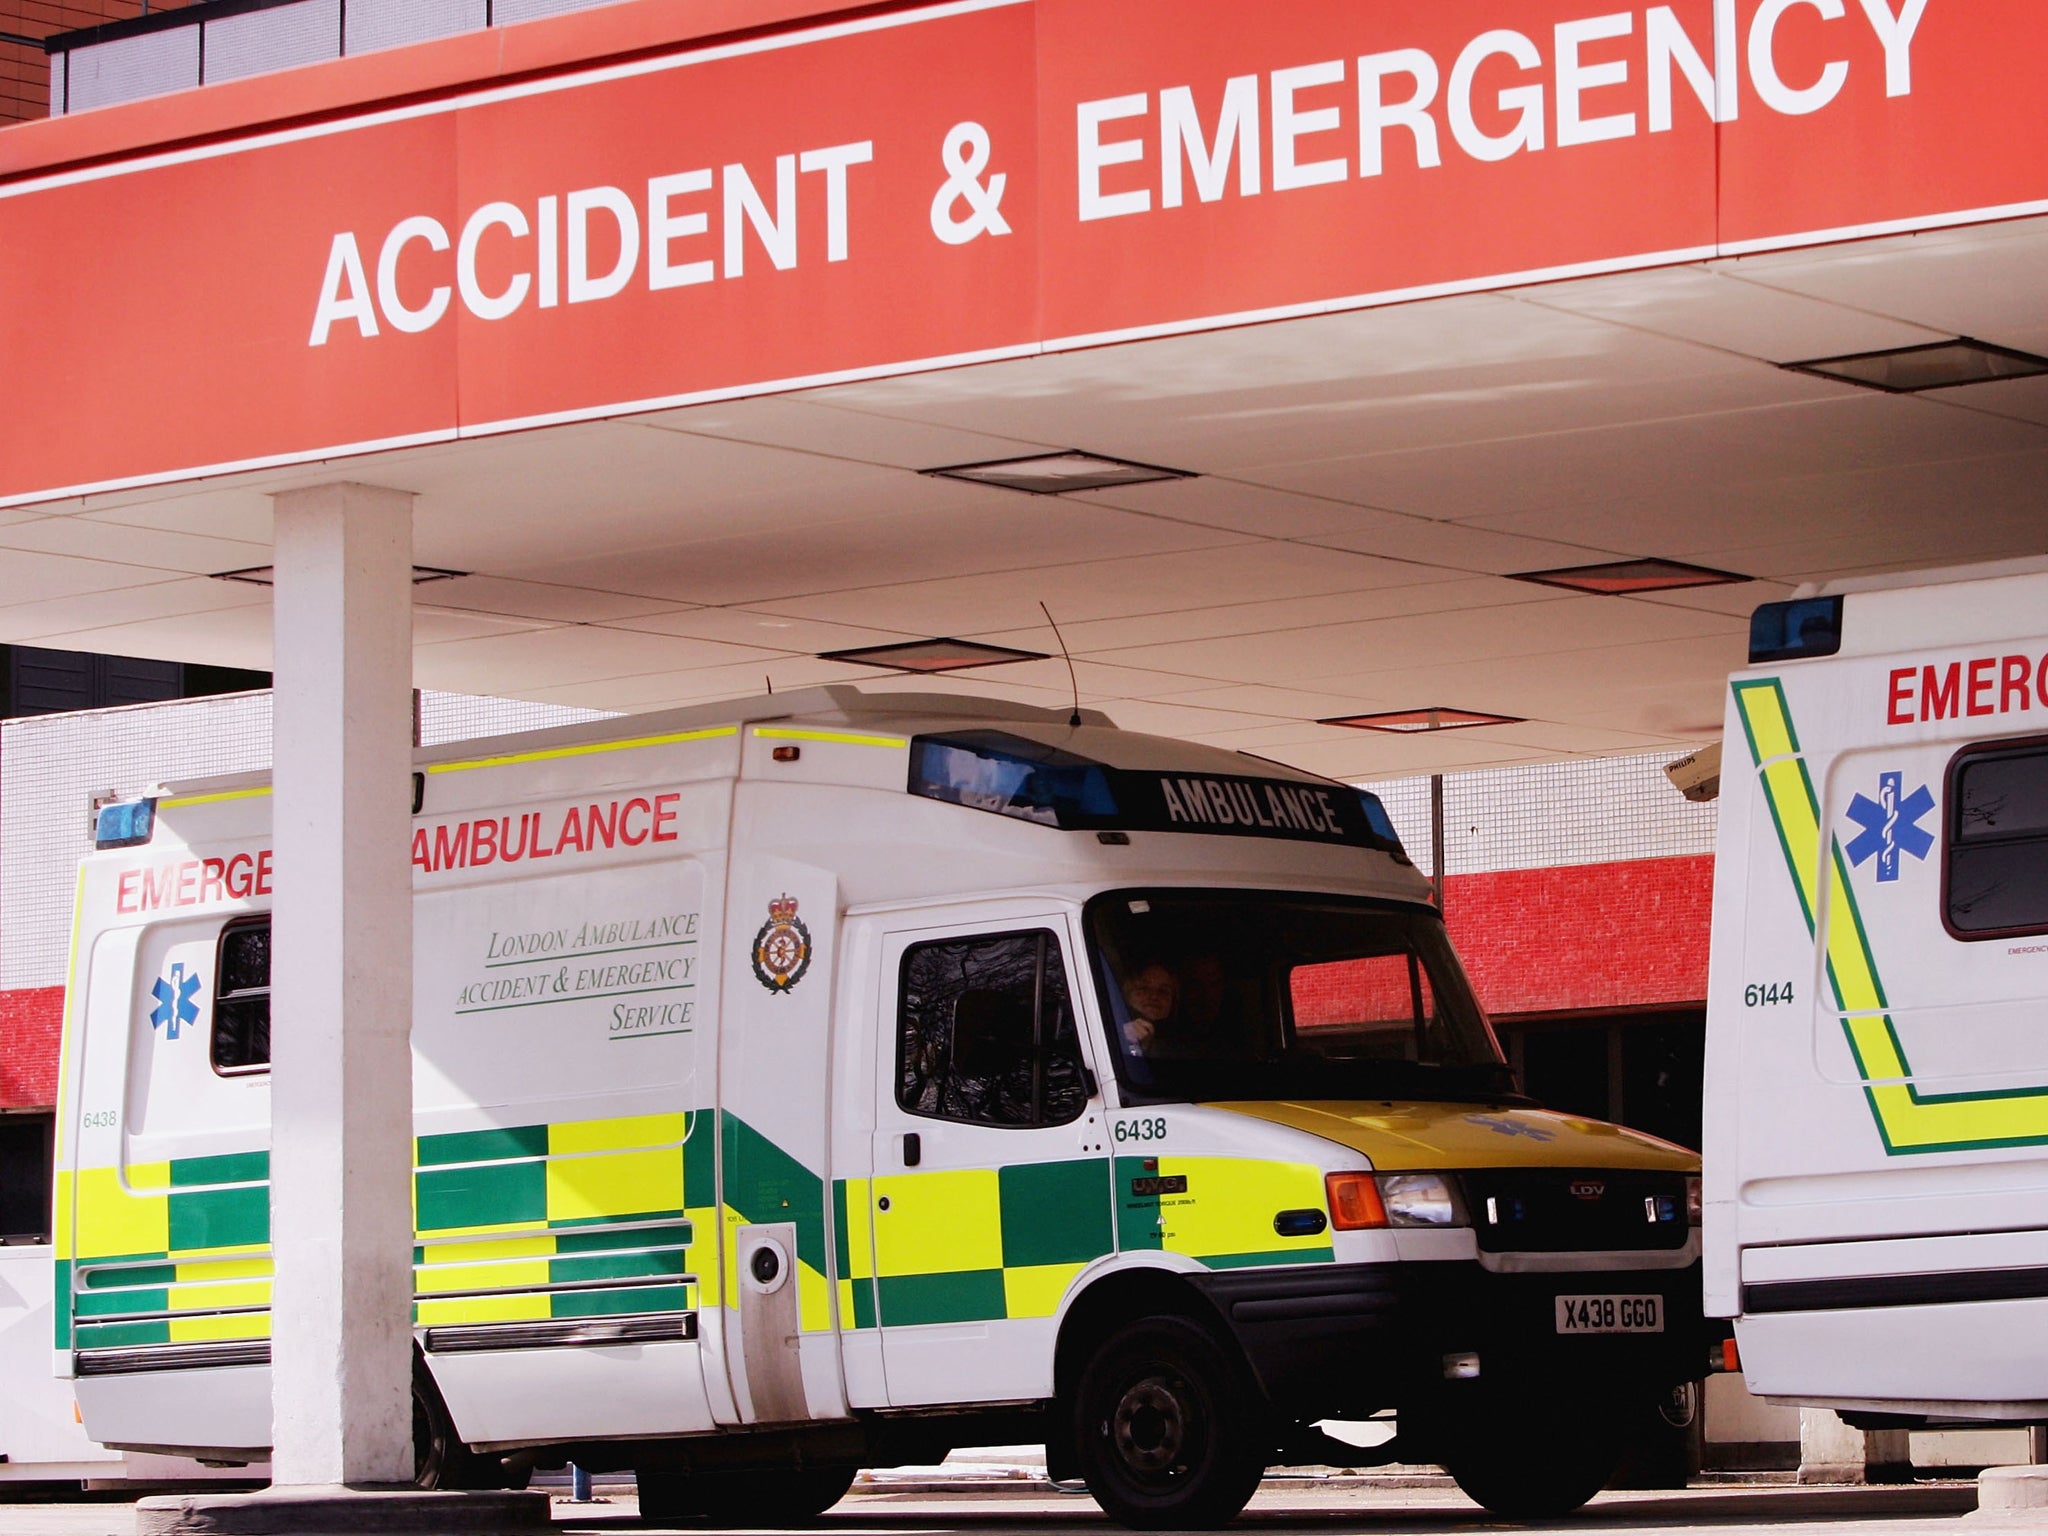 There were 5.3 million emergency hospital admissions in 2012-13